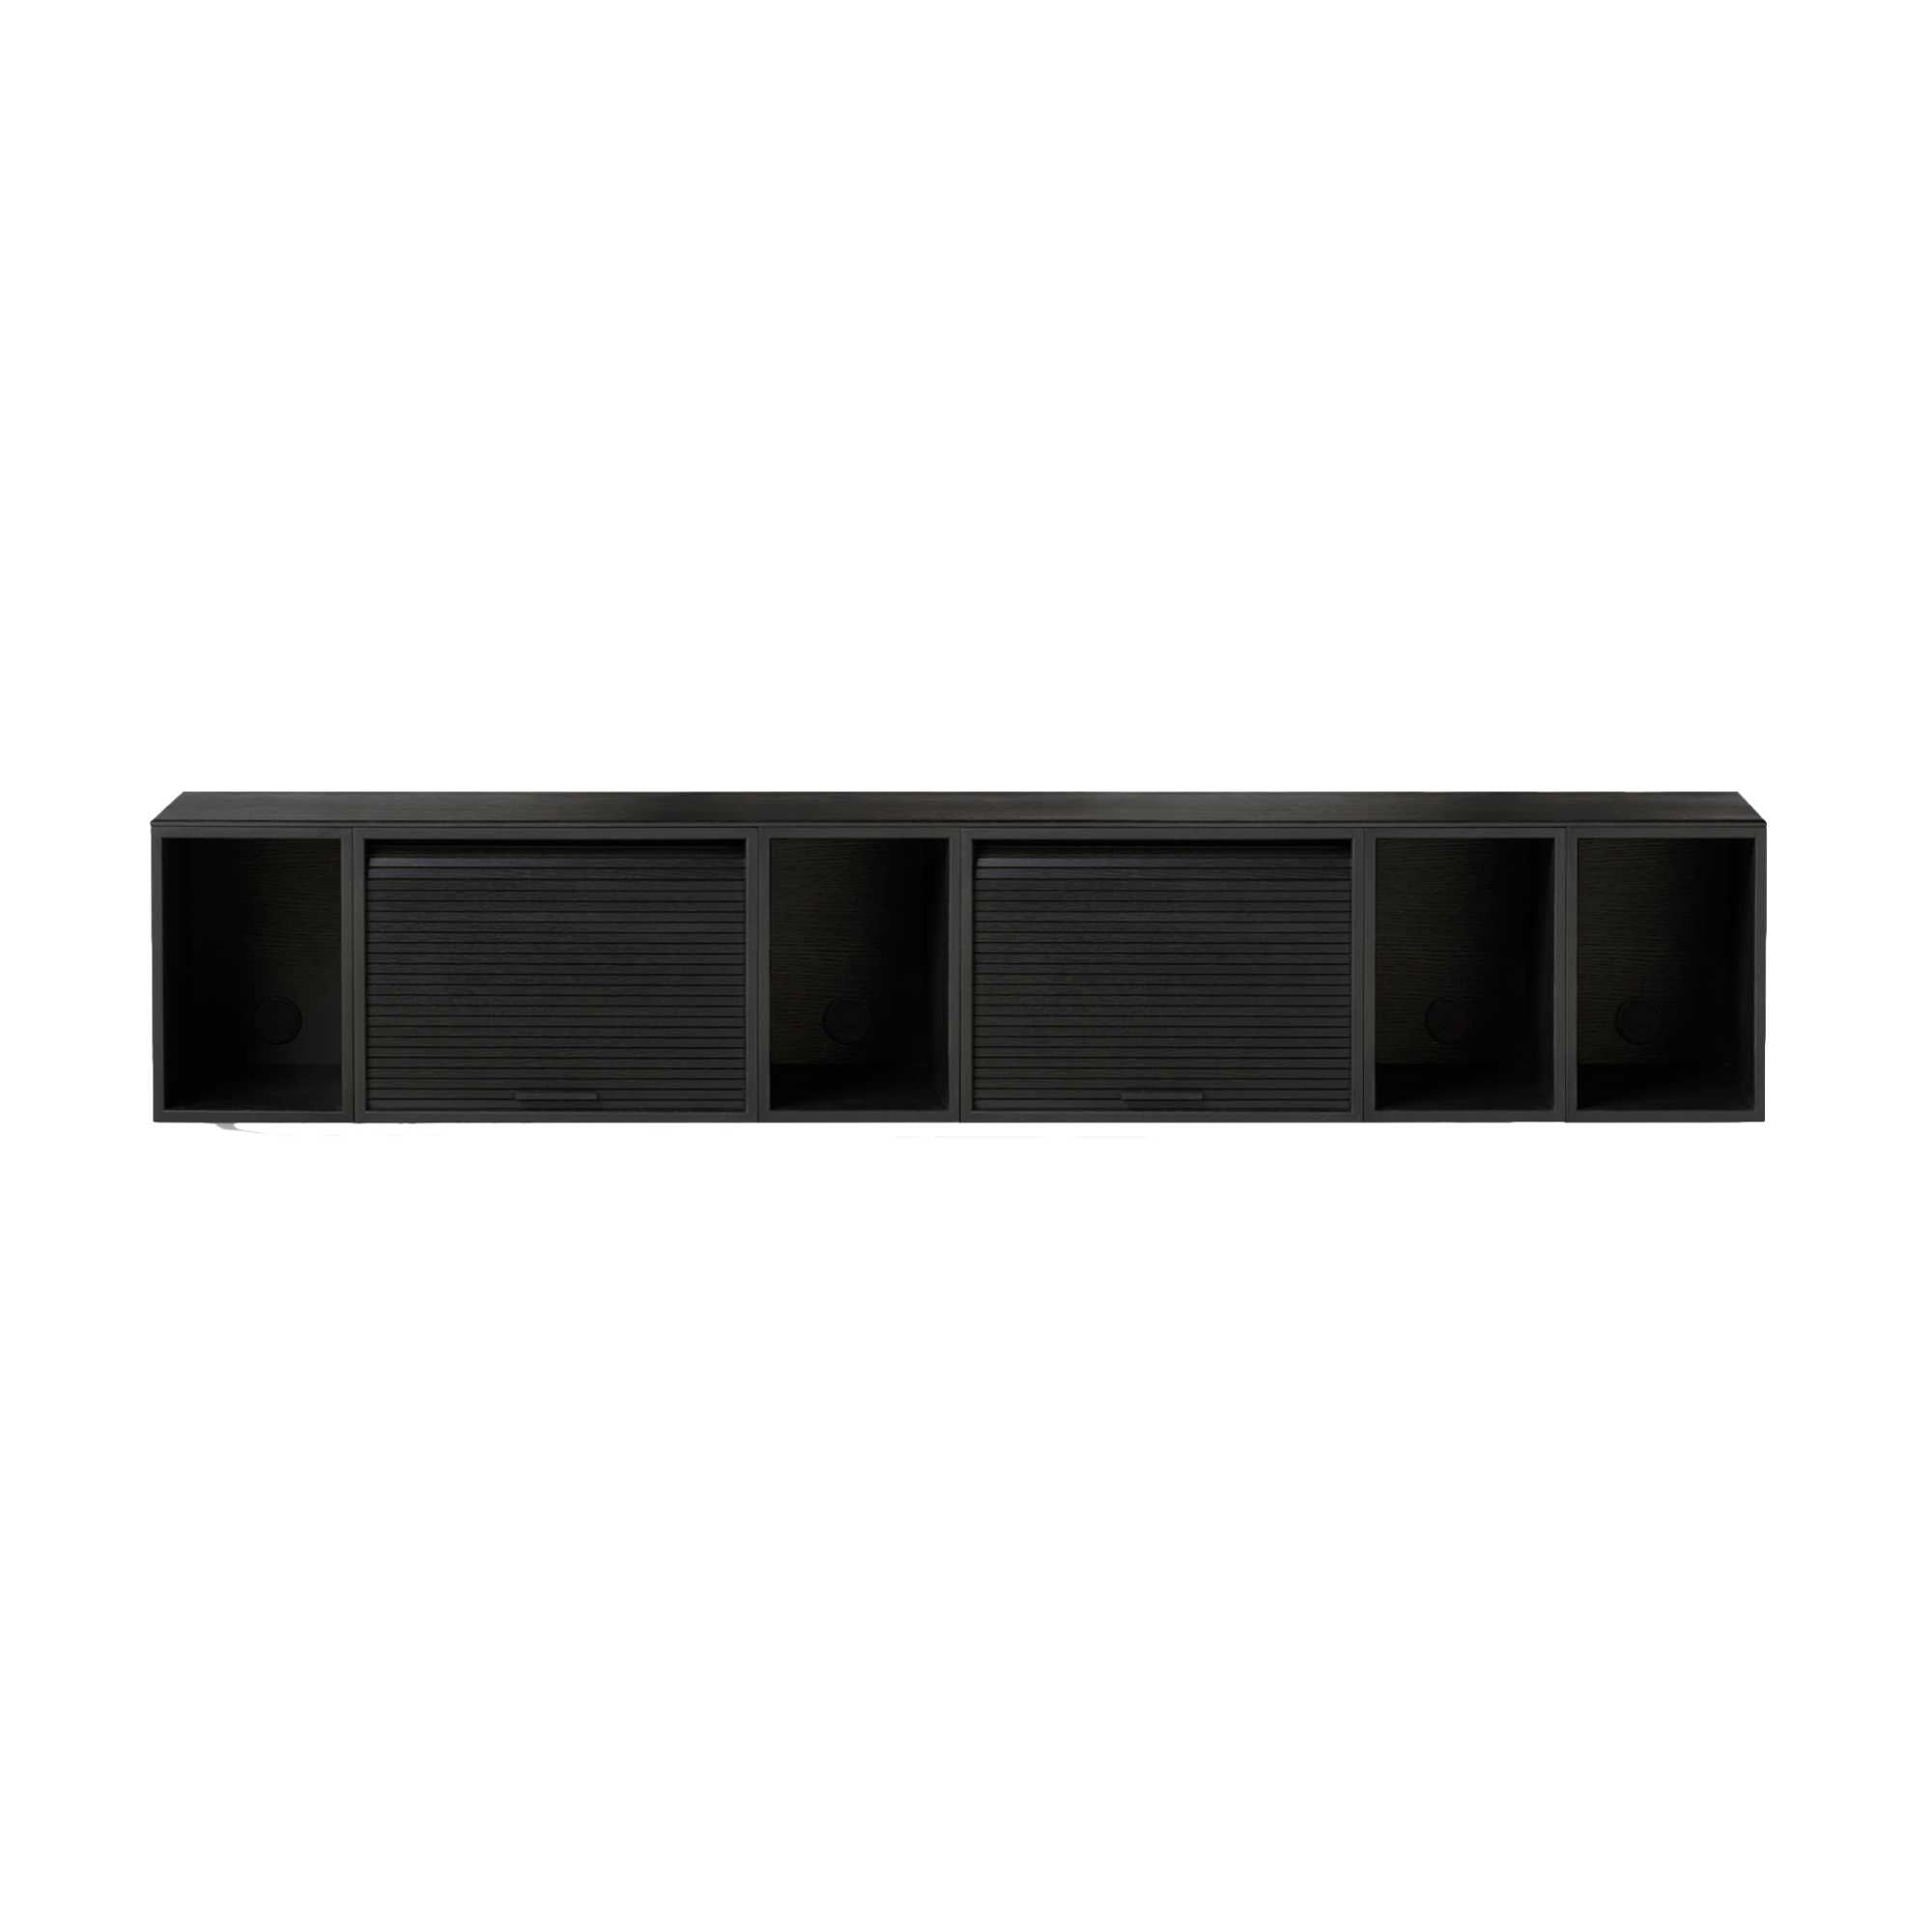 Northern Hifive cabinet system wall, black painted oak (200cm)